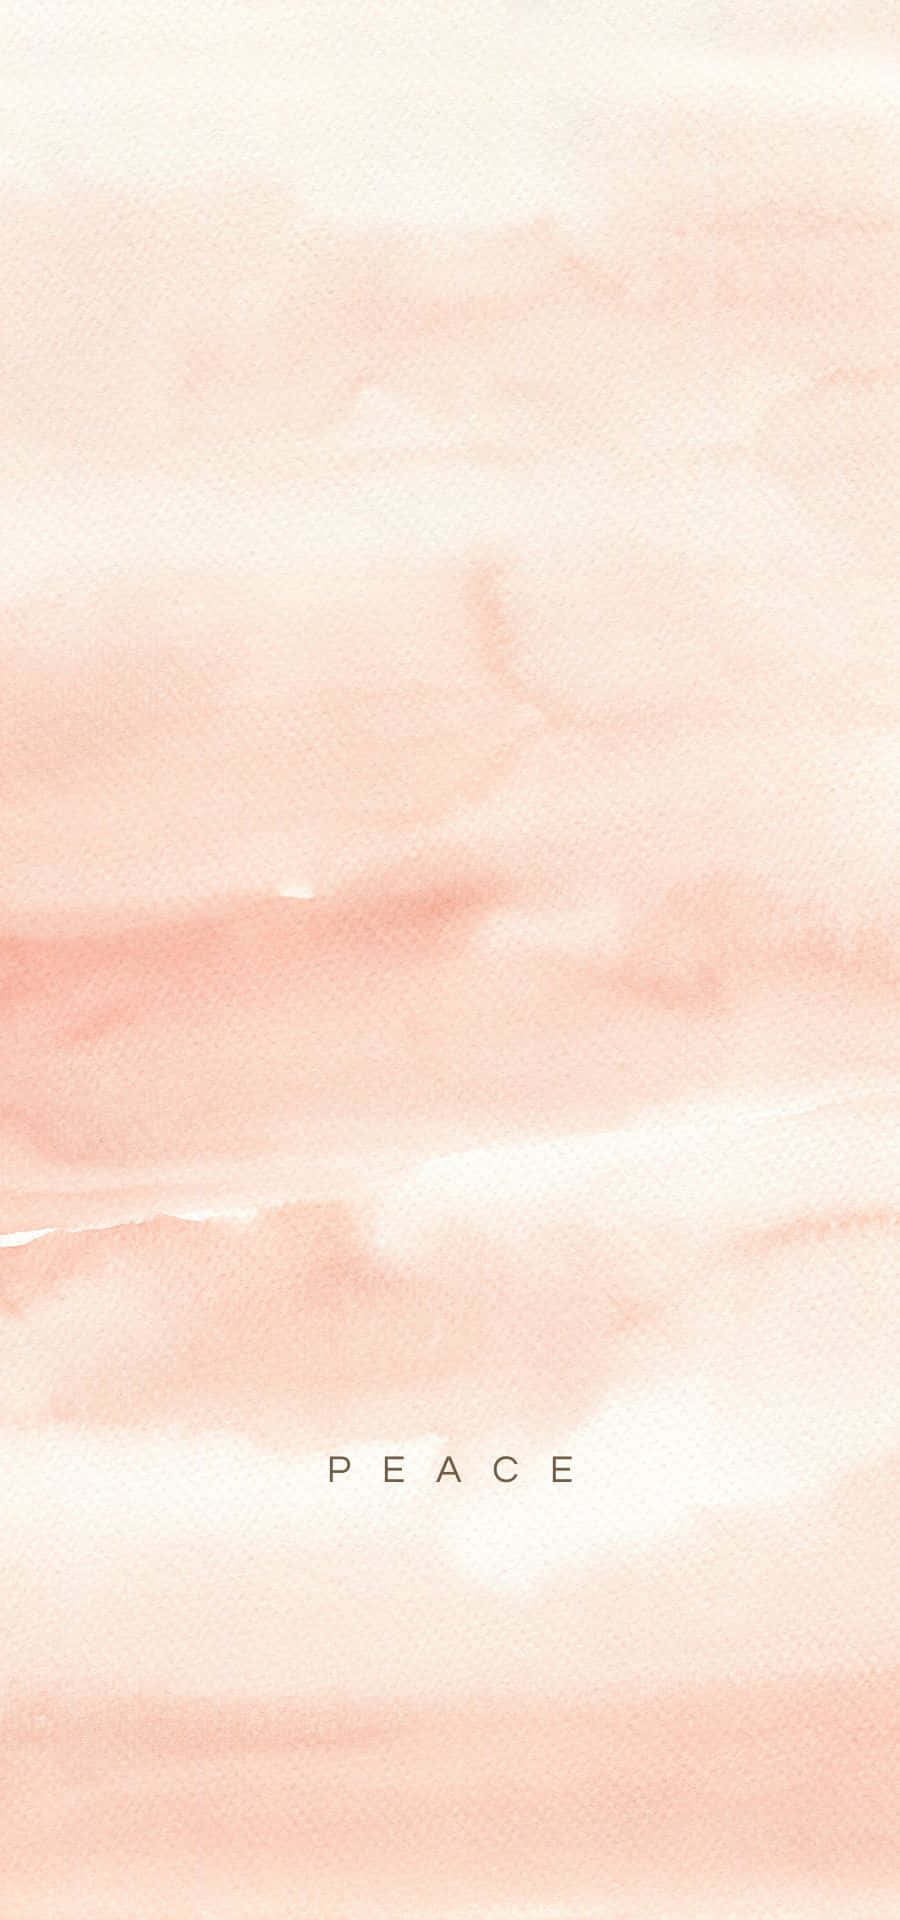 A Watercolor Painting Of A Pink Sky With The Word Peace